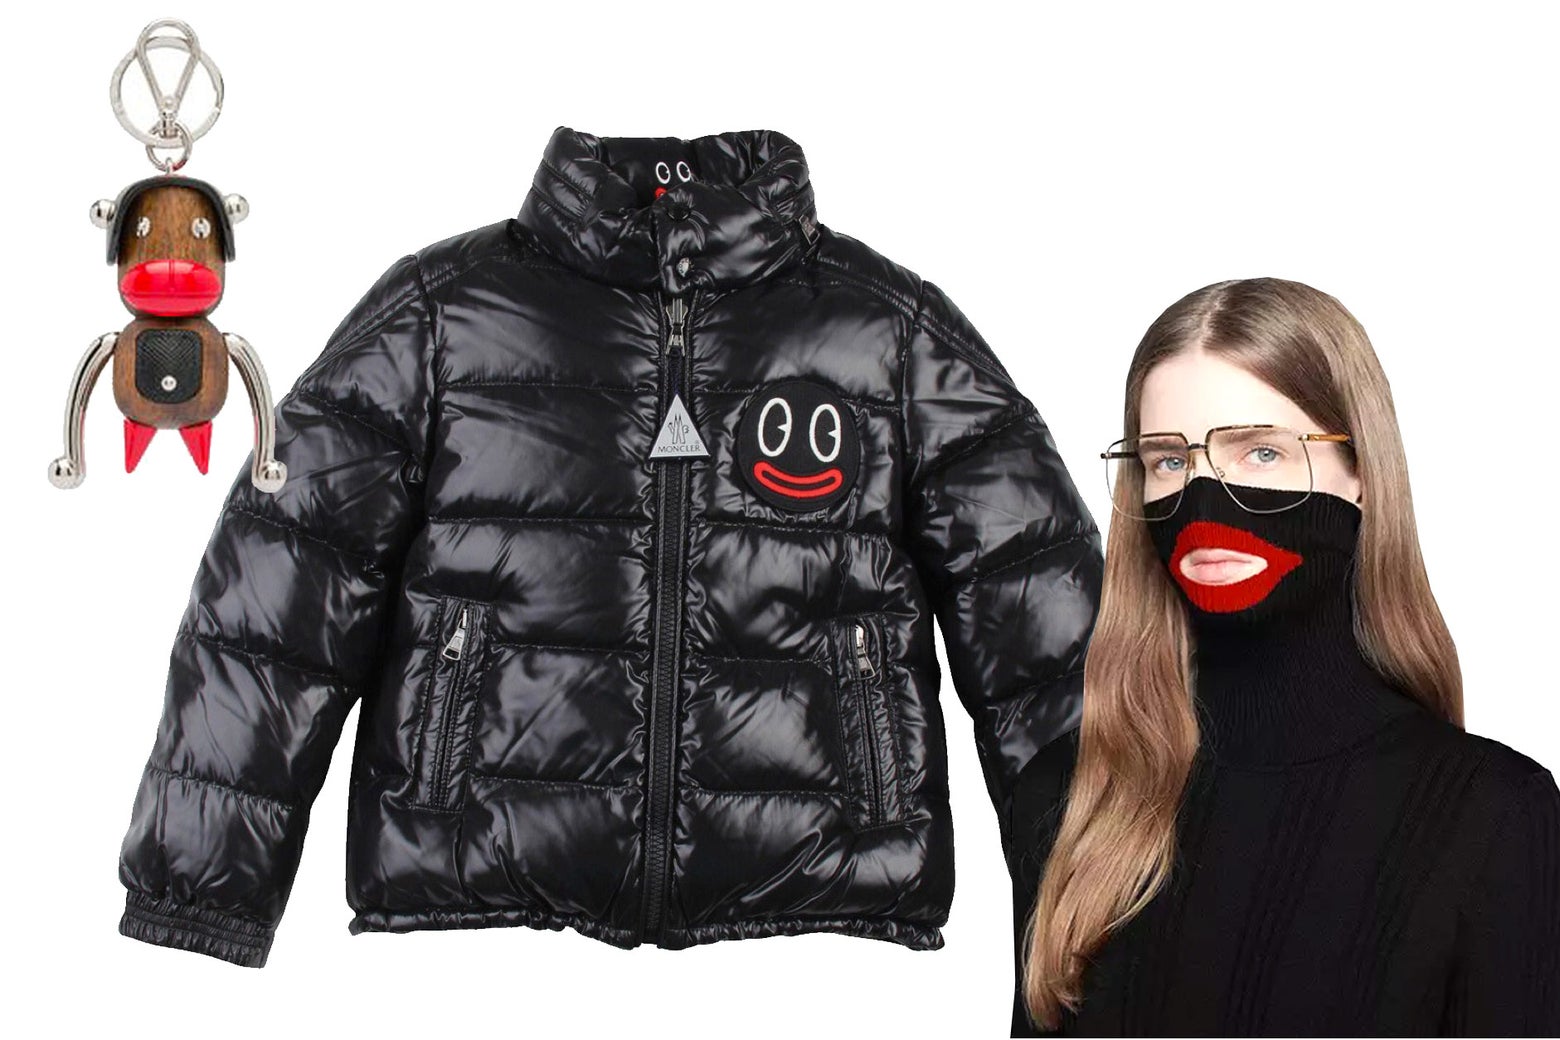 From Fake Gucci to Real Guccy: Fashion's Identity Crisis or Alter Ego?